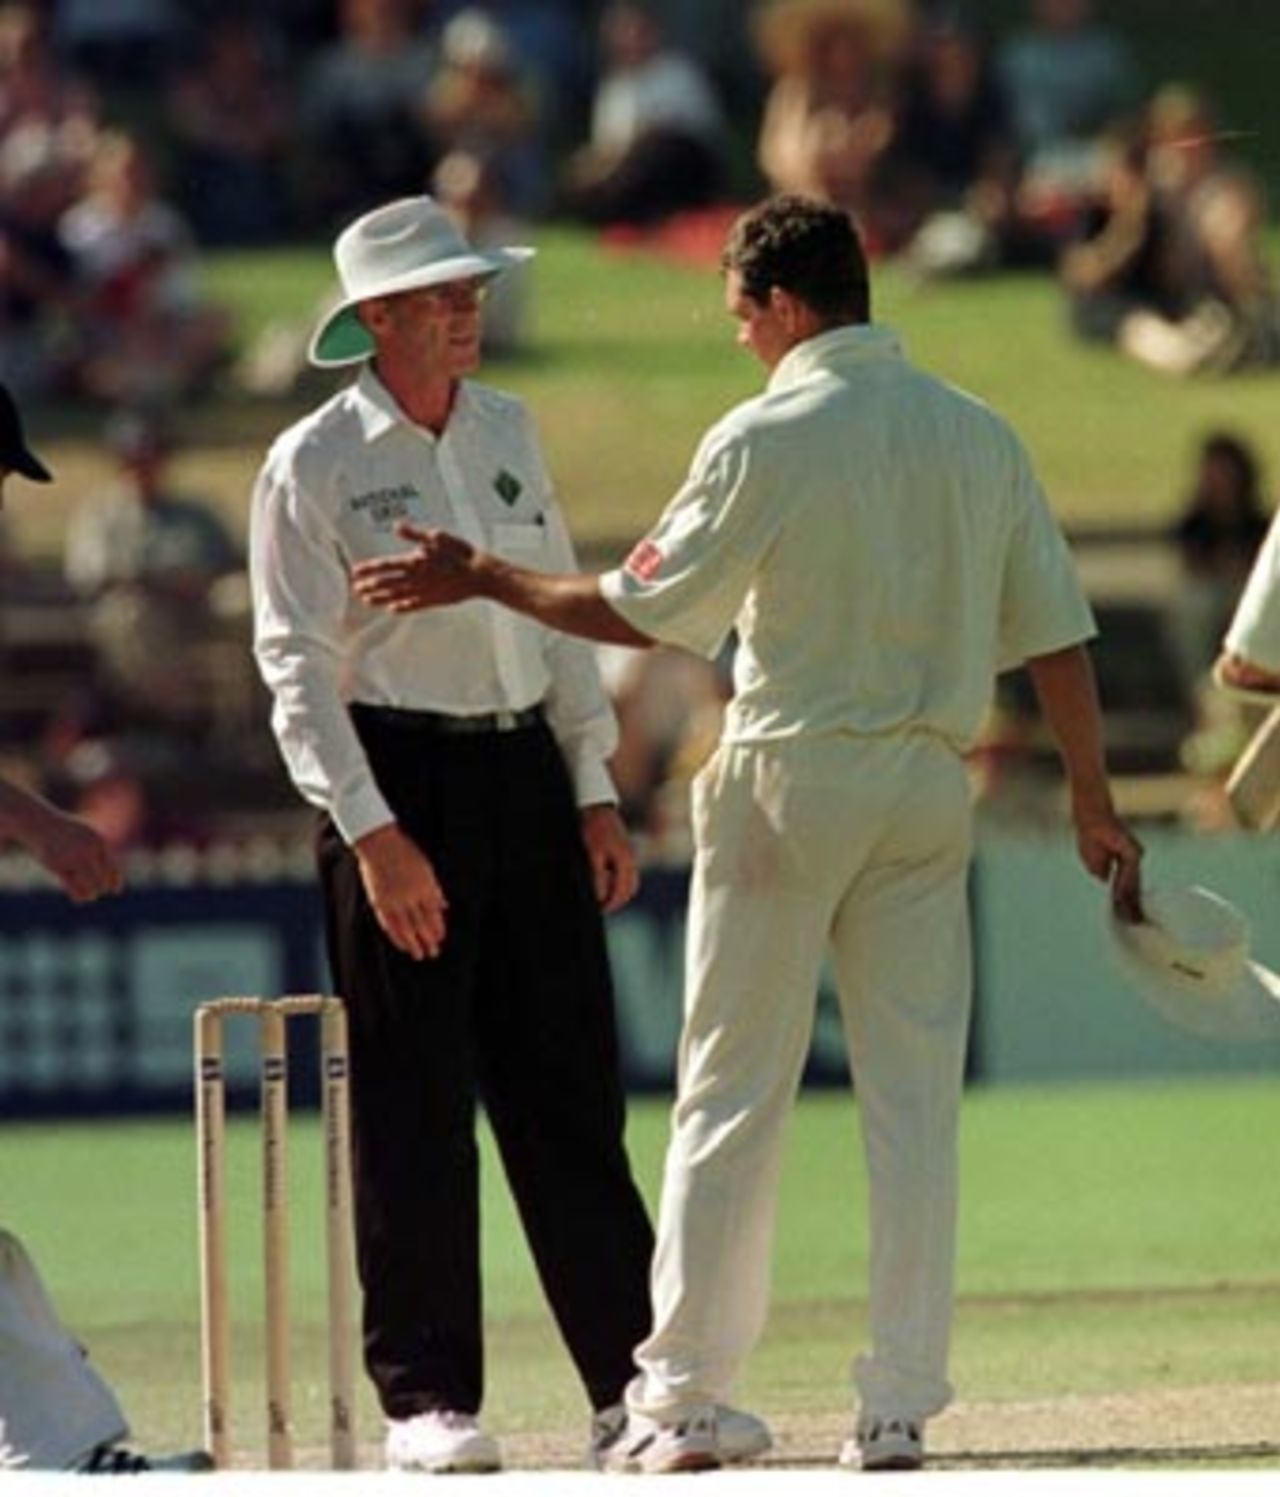 Hansie Cronje argues with umpire Steve Randall over the Mark Waugh not out decision ..Australia v South Africa 3rd Test, Final Day at the Adelaide Oval, Tuesday February 3rd, 1998.